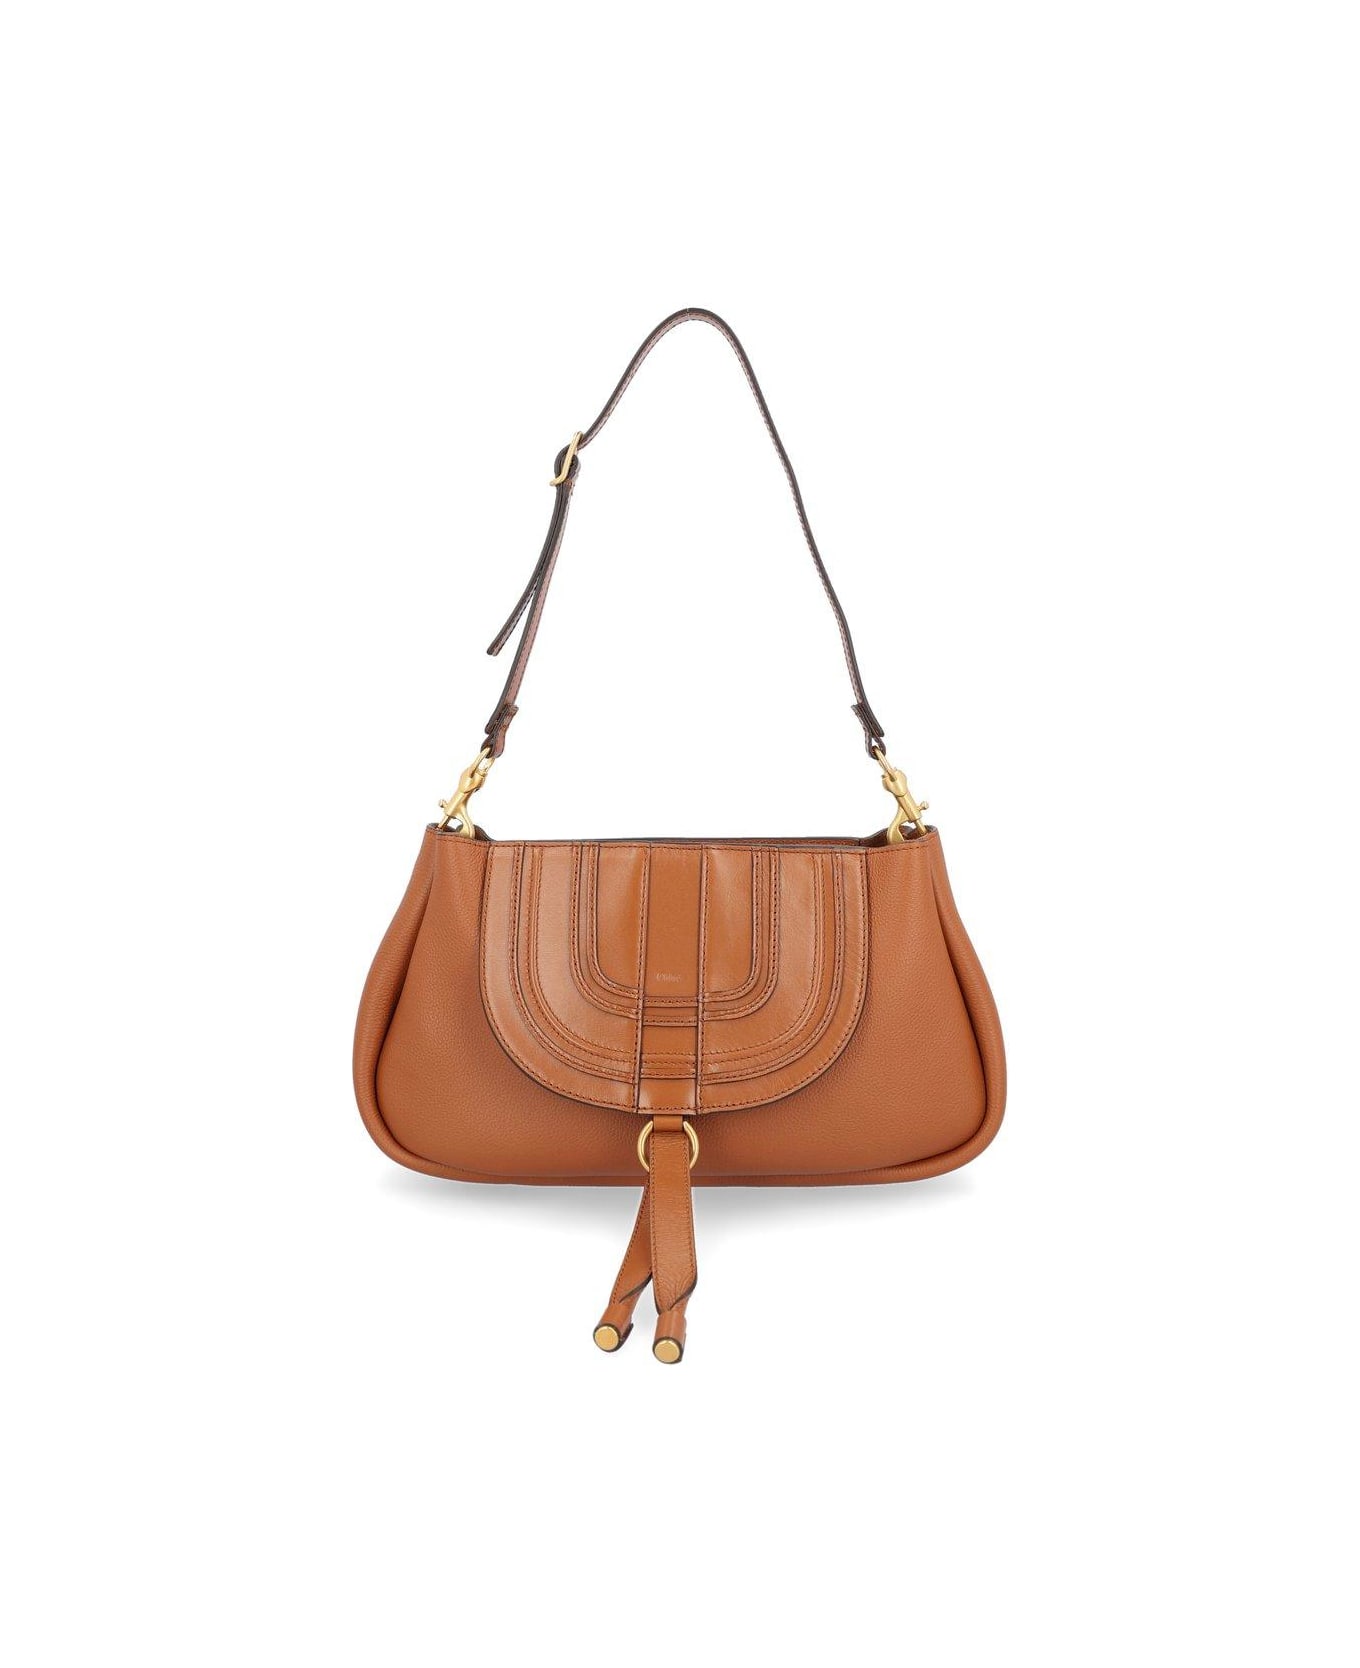 Chloé Marcie Clutch Bag - Leather Brown トートバッグ